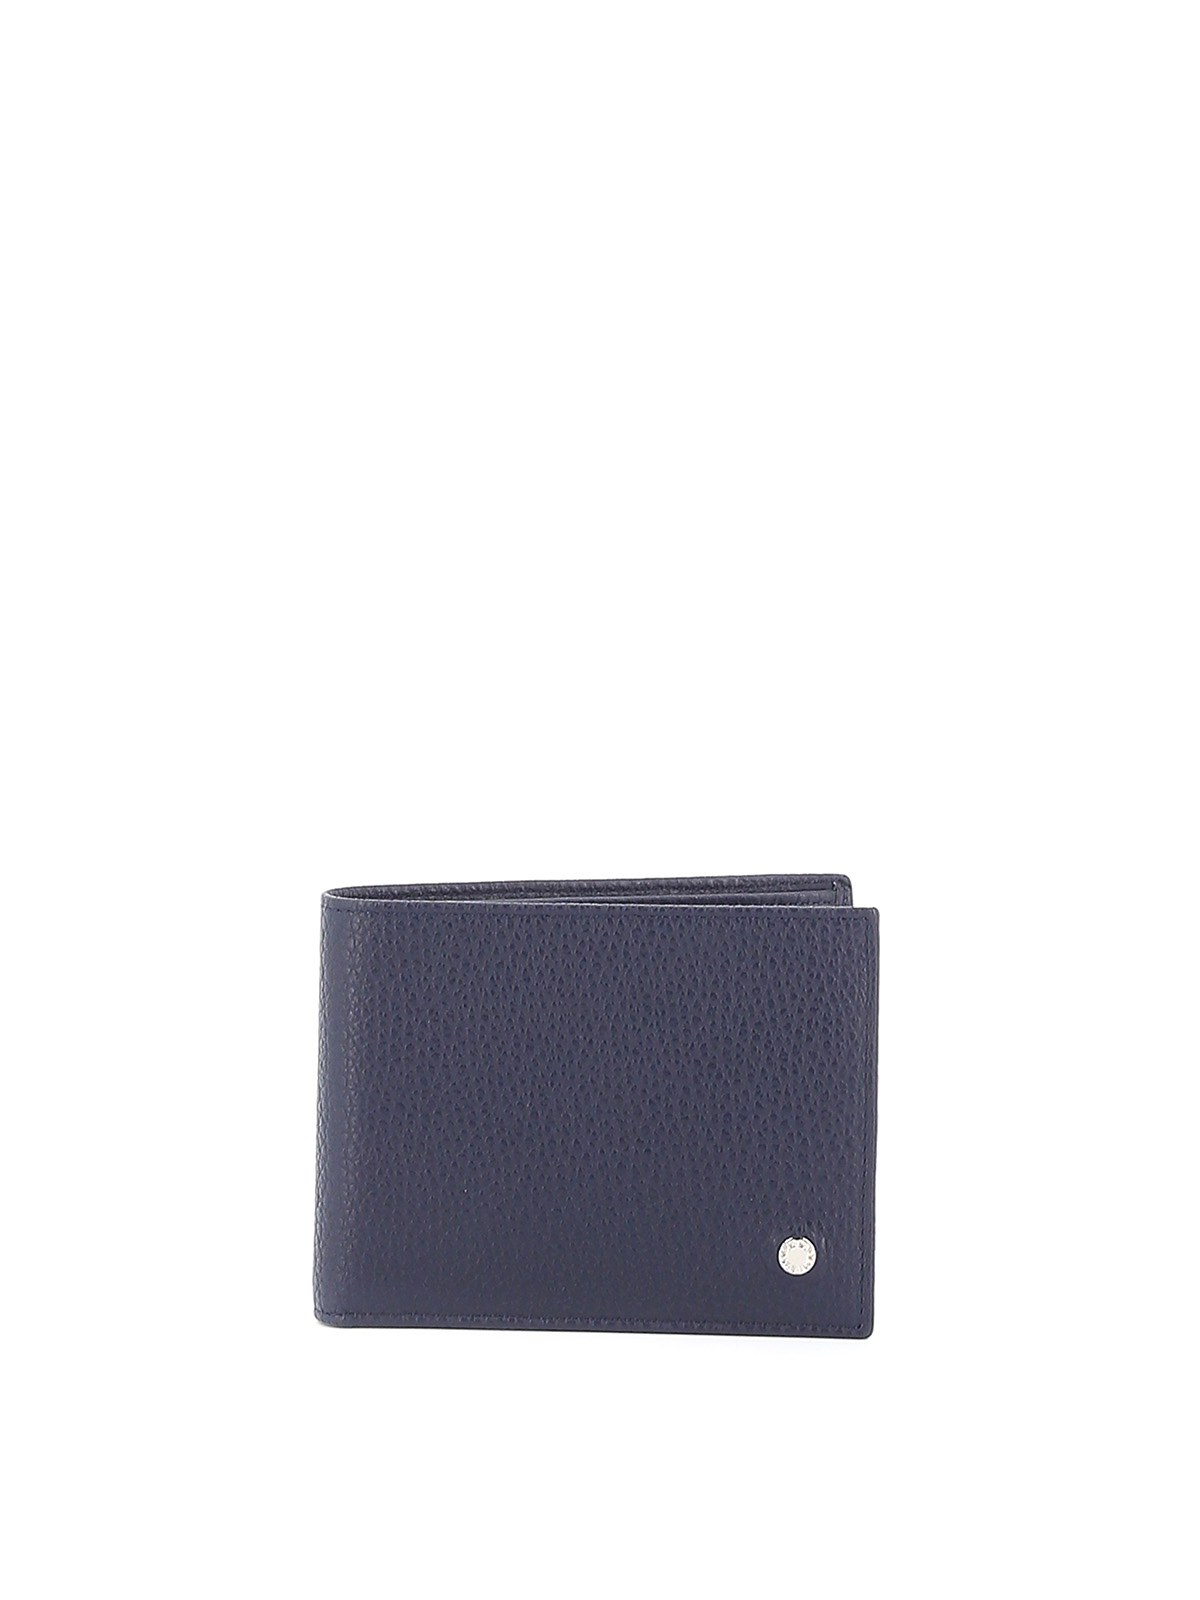 Orciani Navy Grainy Leather Bifold Wallet In Blue